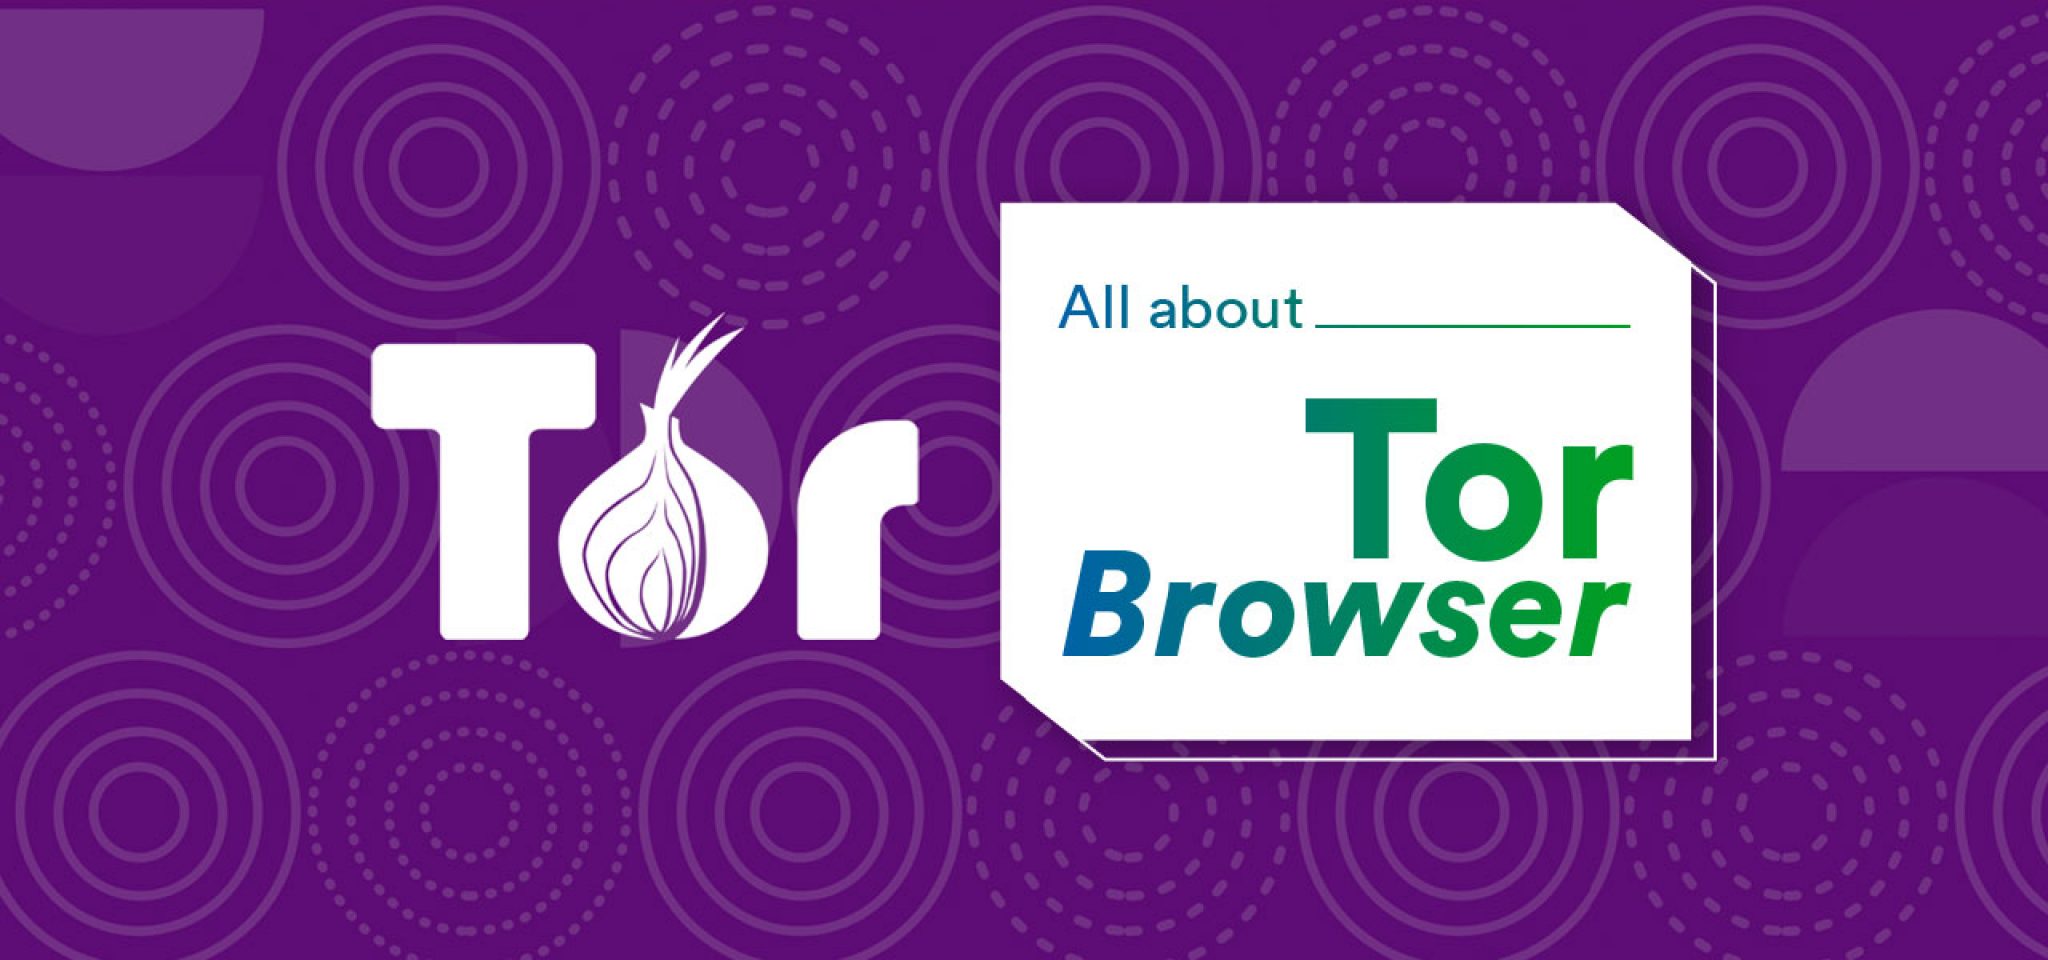 tor download watched